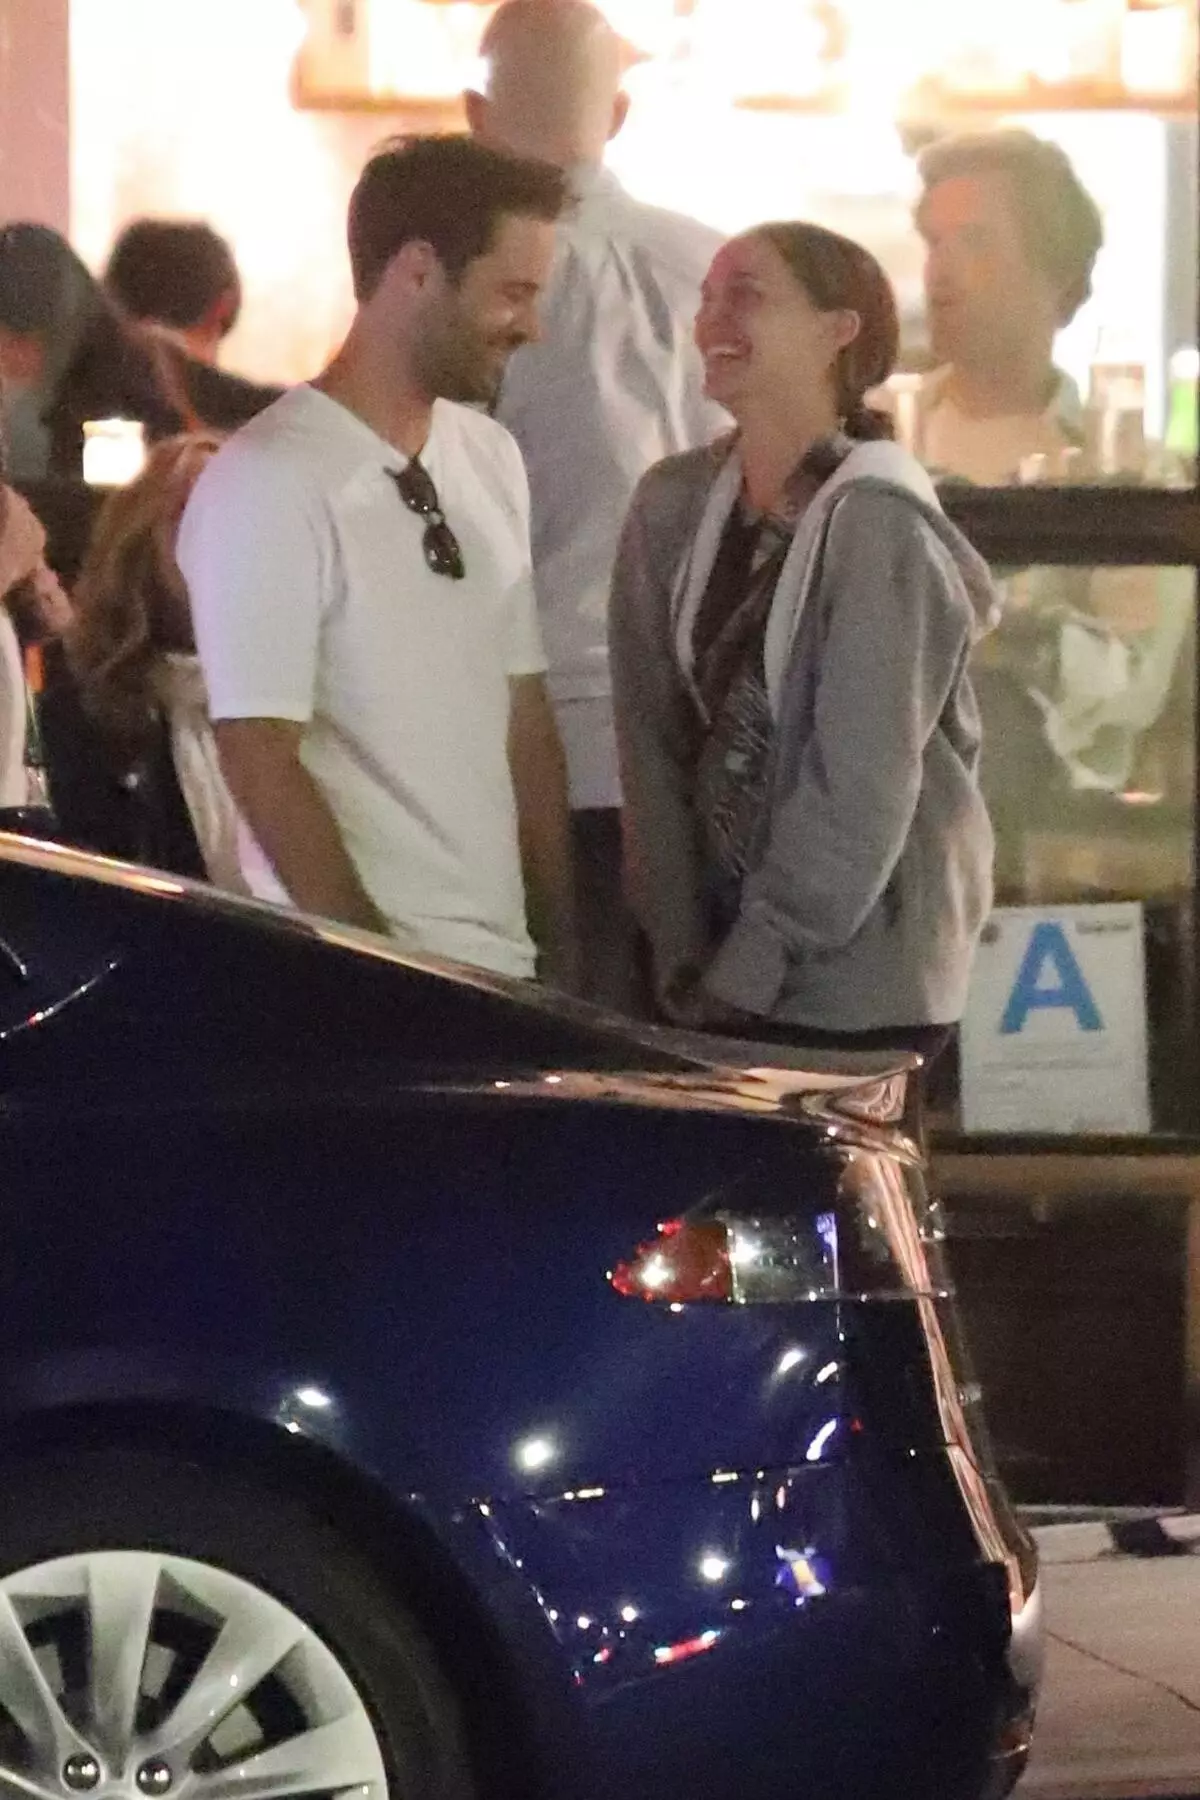 Very nice: Natalie Portman on a romantic dinner with her husband in Los Angeles 126165_6